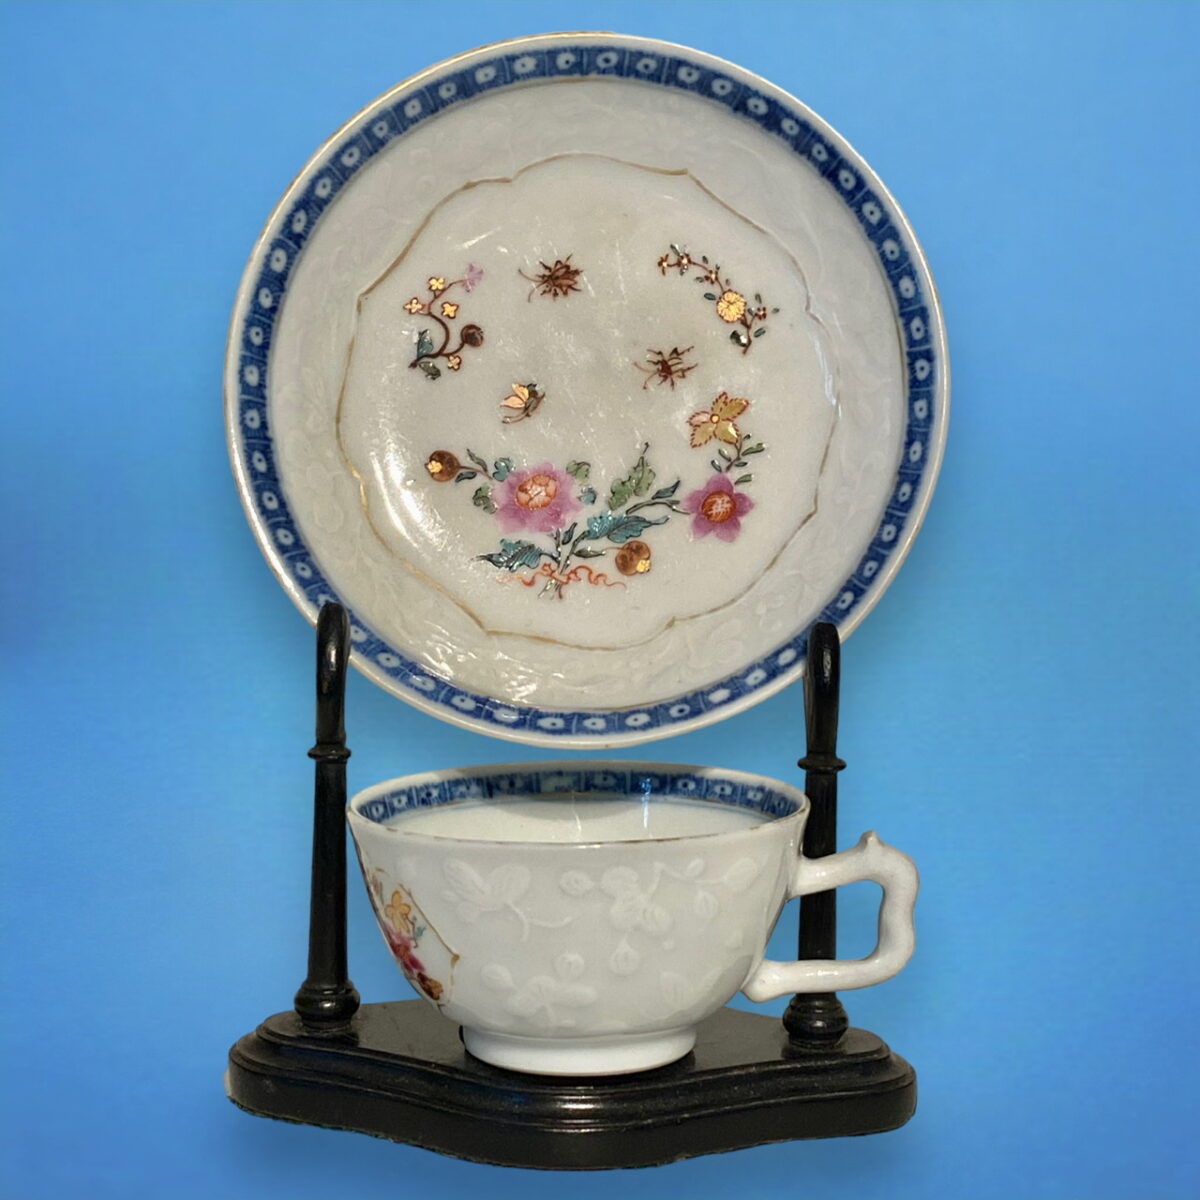 18th Century Chinese Export Porcelain Tea Cup & Saucer.